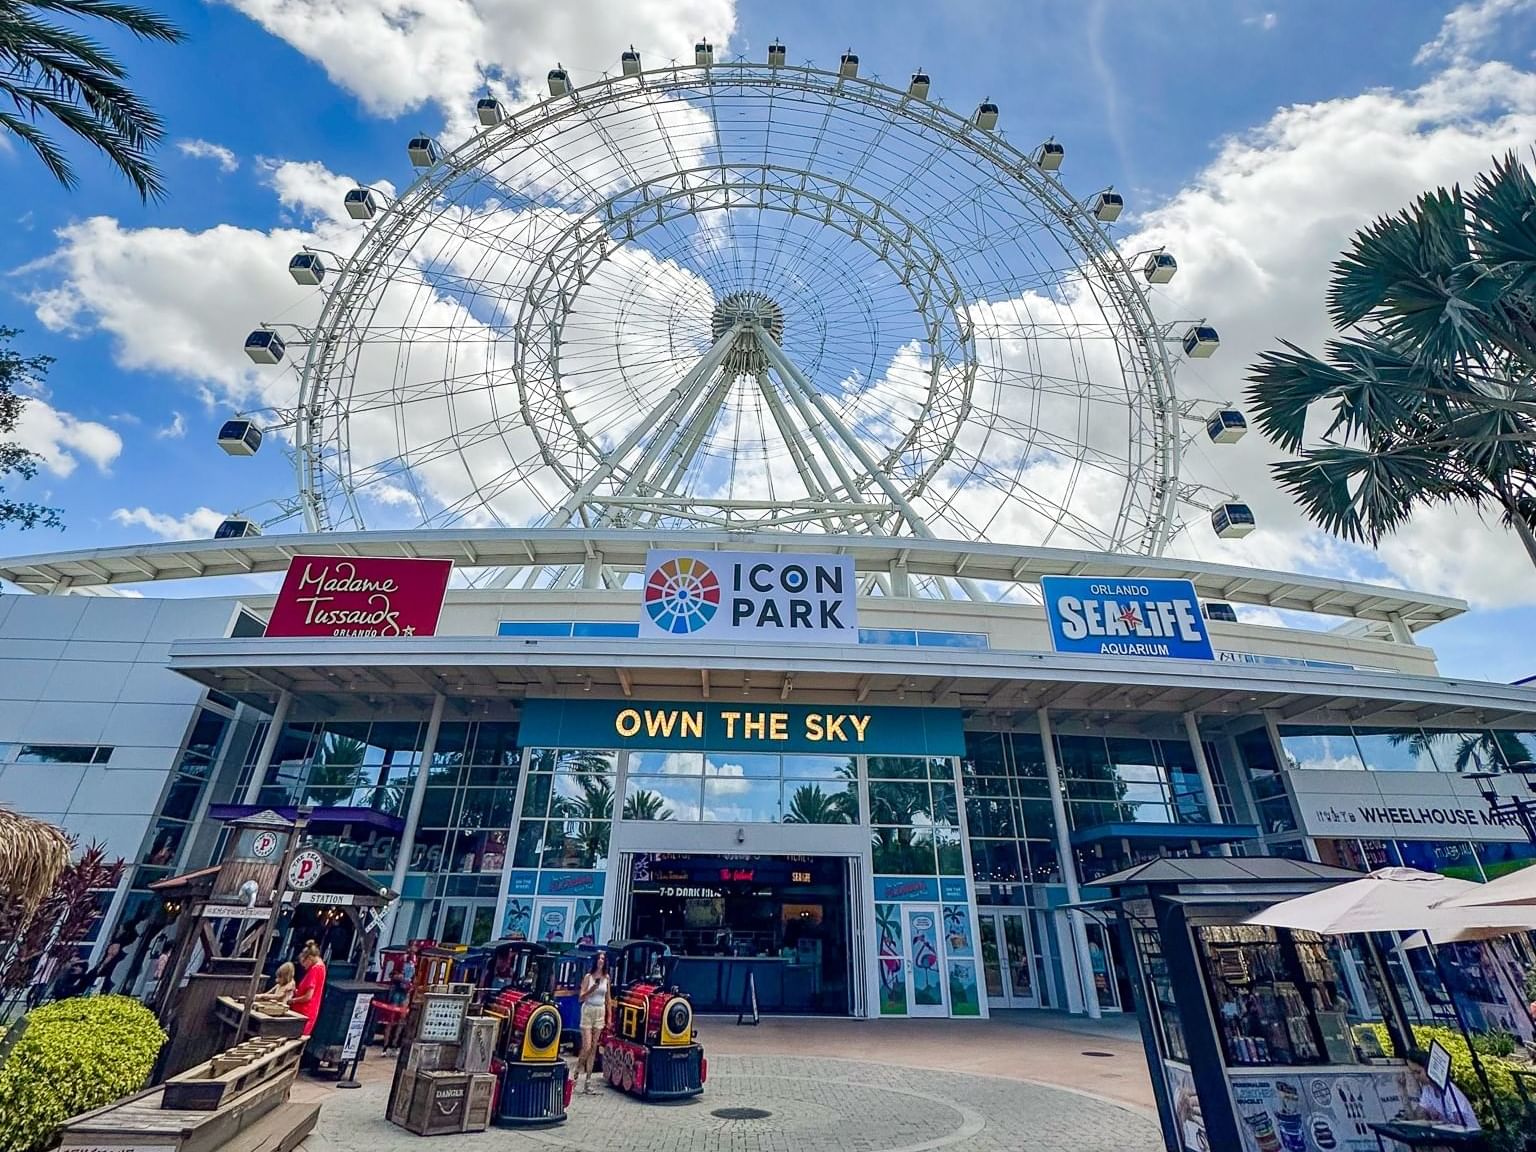 Exterior view of The Orlando Eye at ICON Park.